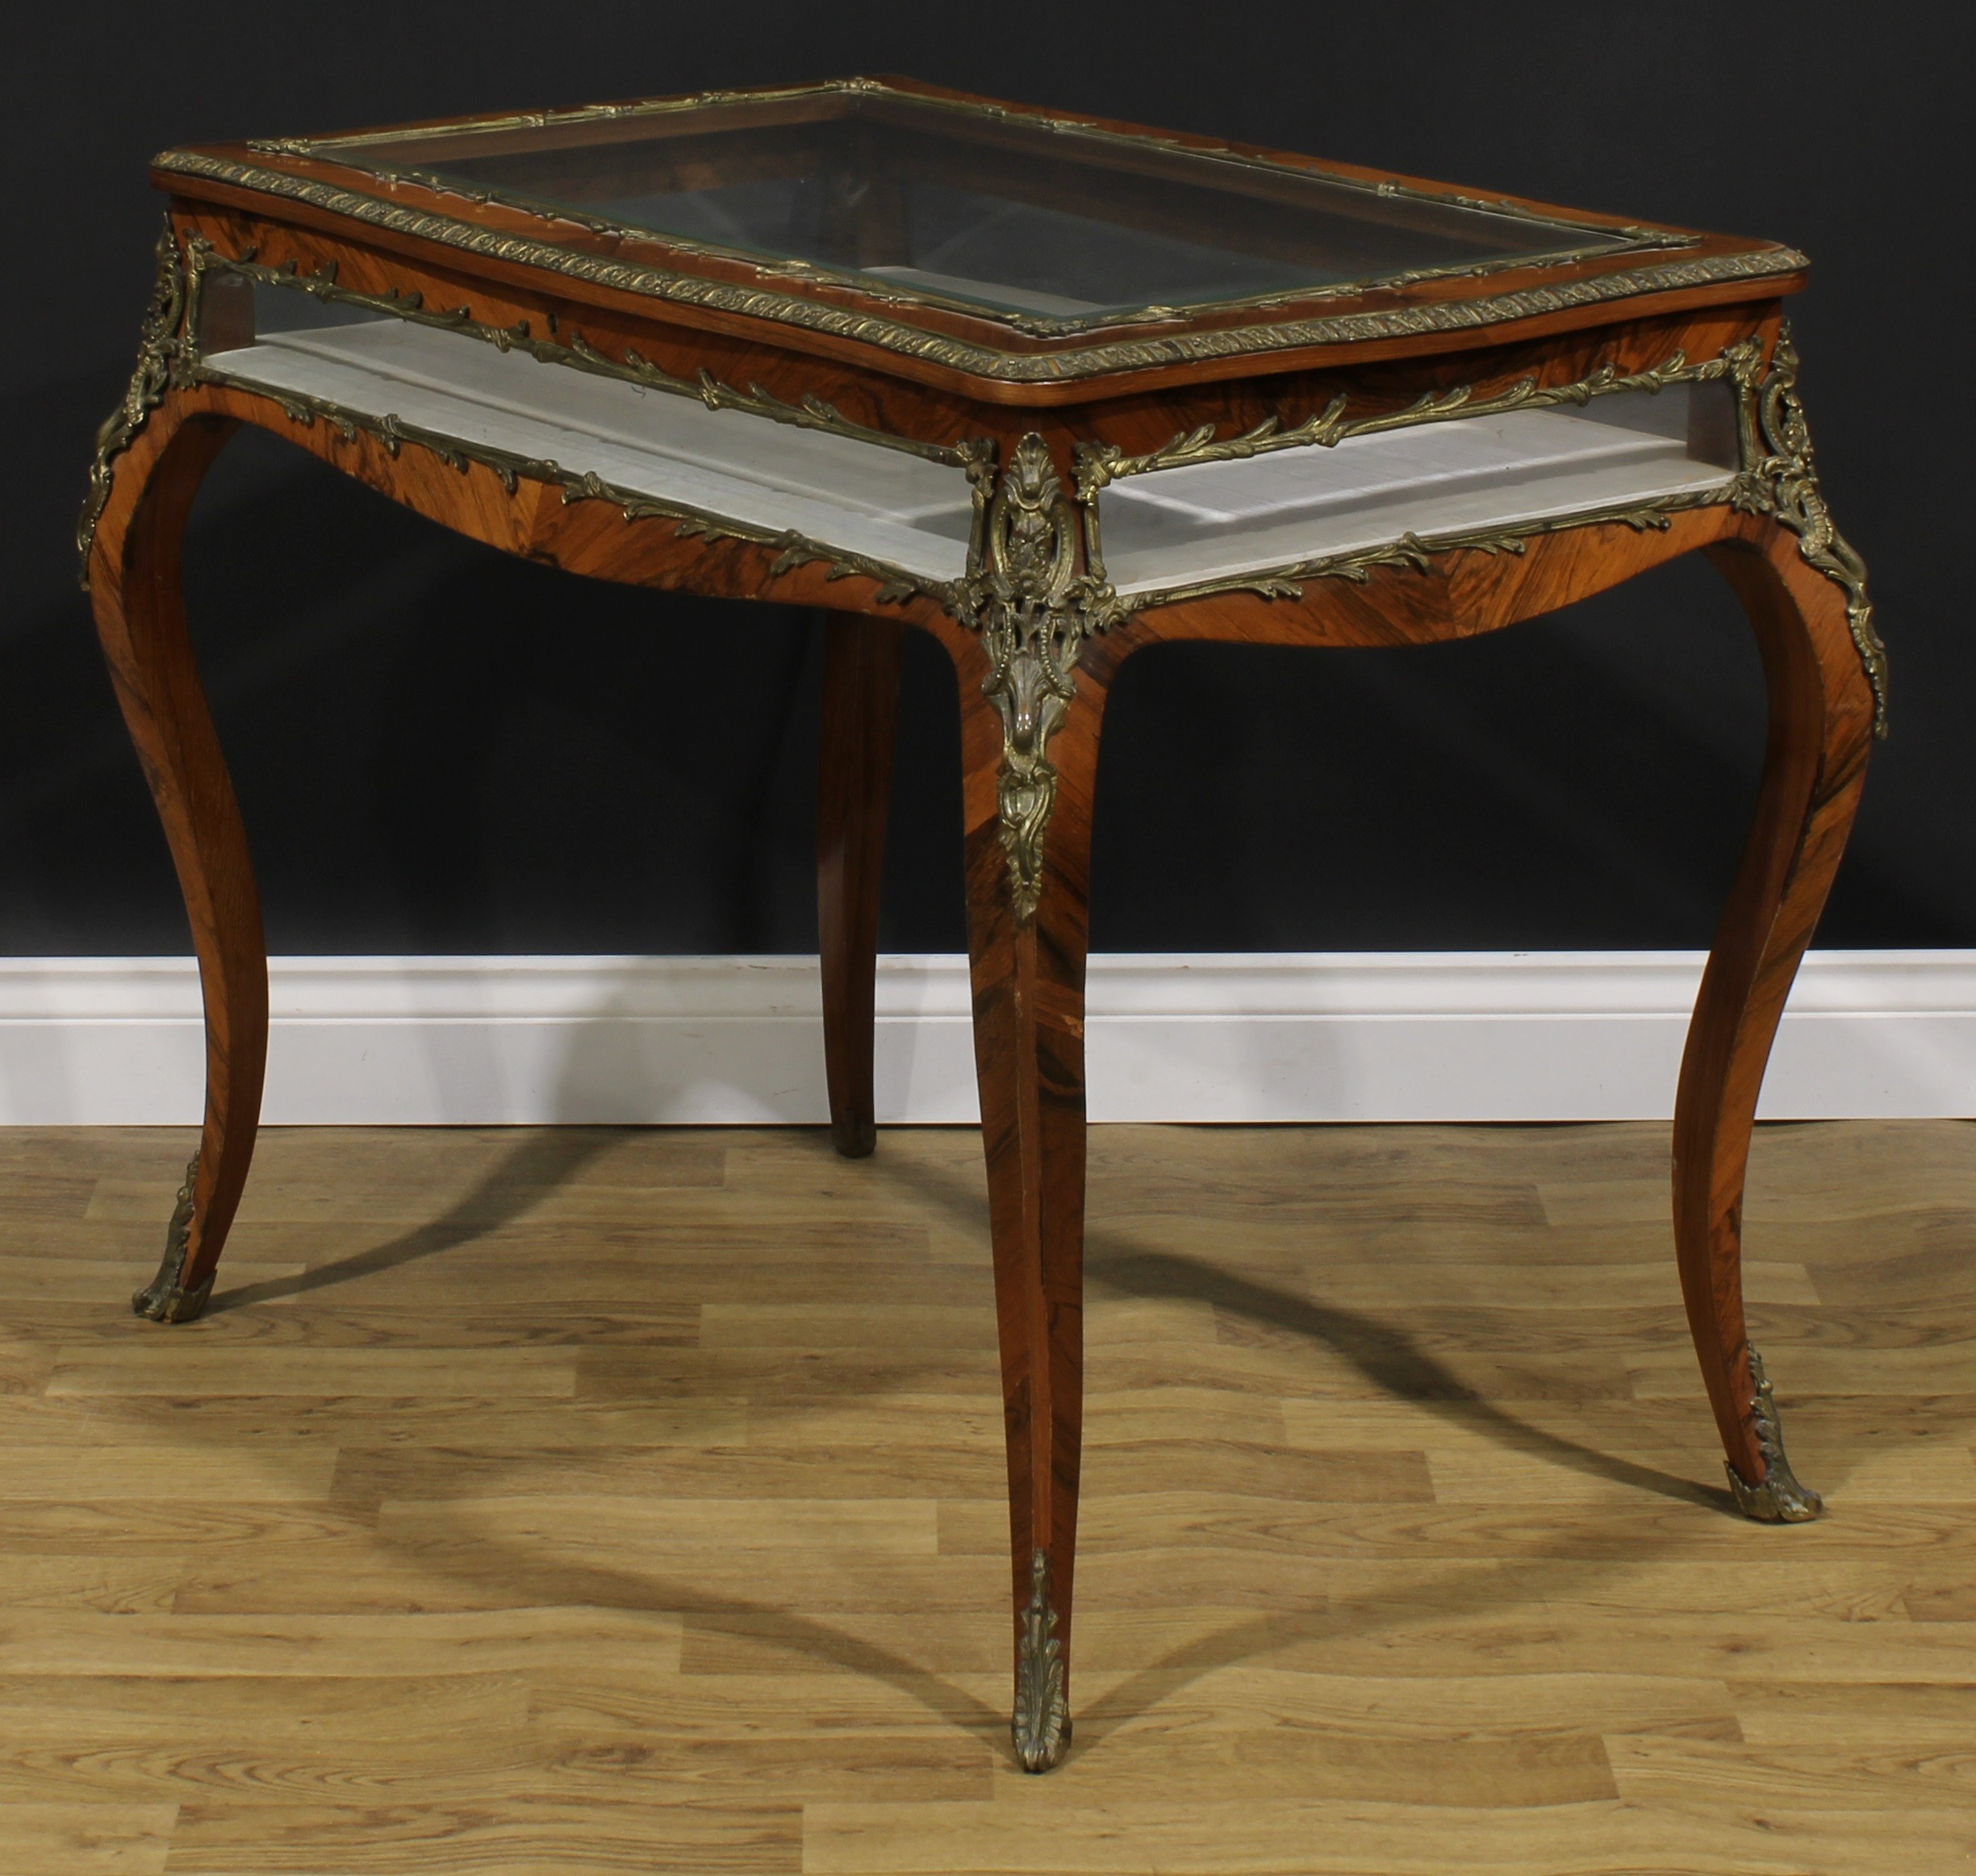 A Louis XV Revival gilt metal mounted rosewood bijouterie table, hinged top, French cabriole legs, - Image 3 of 4